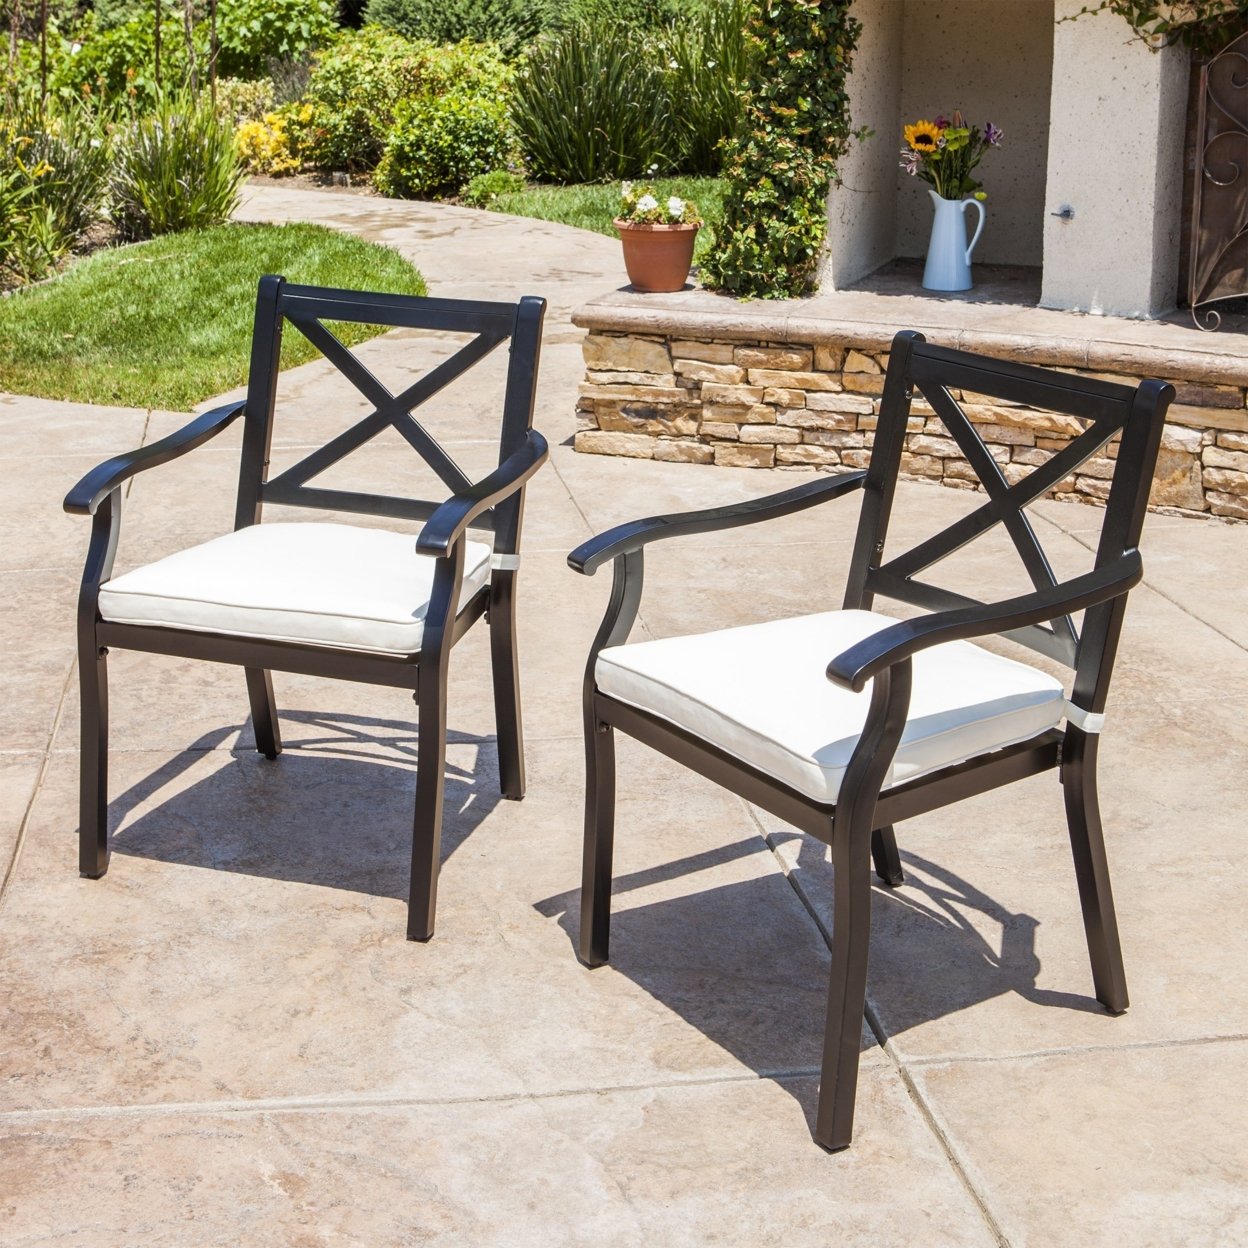 Eowyn Outdoor Cast Aluminum Dining Chairs With Water Resistant Cushions (Set Of 2)